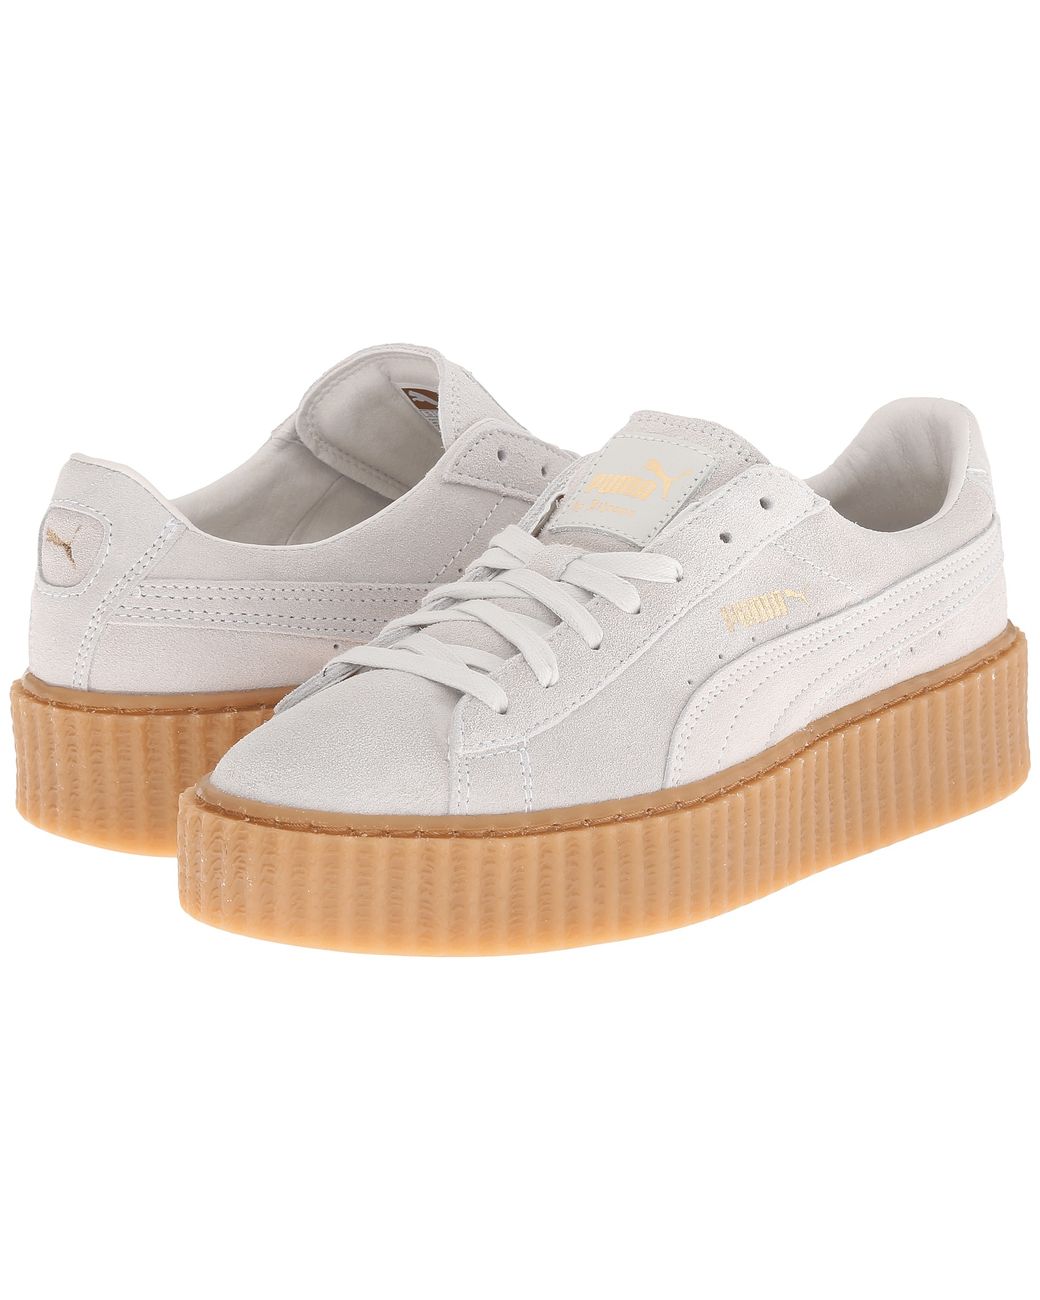 Voorkeur vervoer Overgave PUMA Rihanna X Suede Creepers in White | Lyst